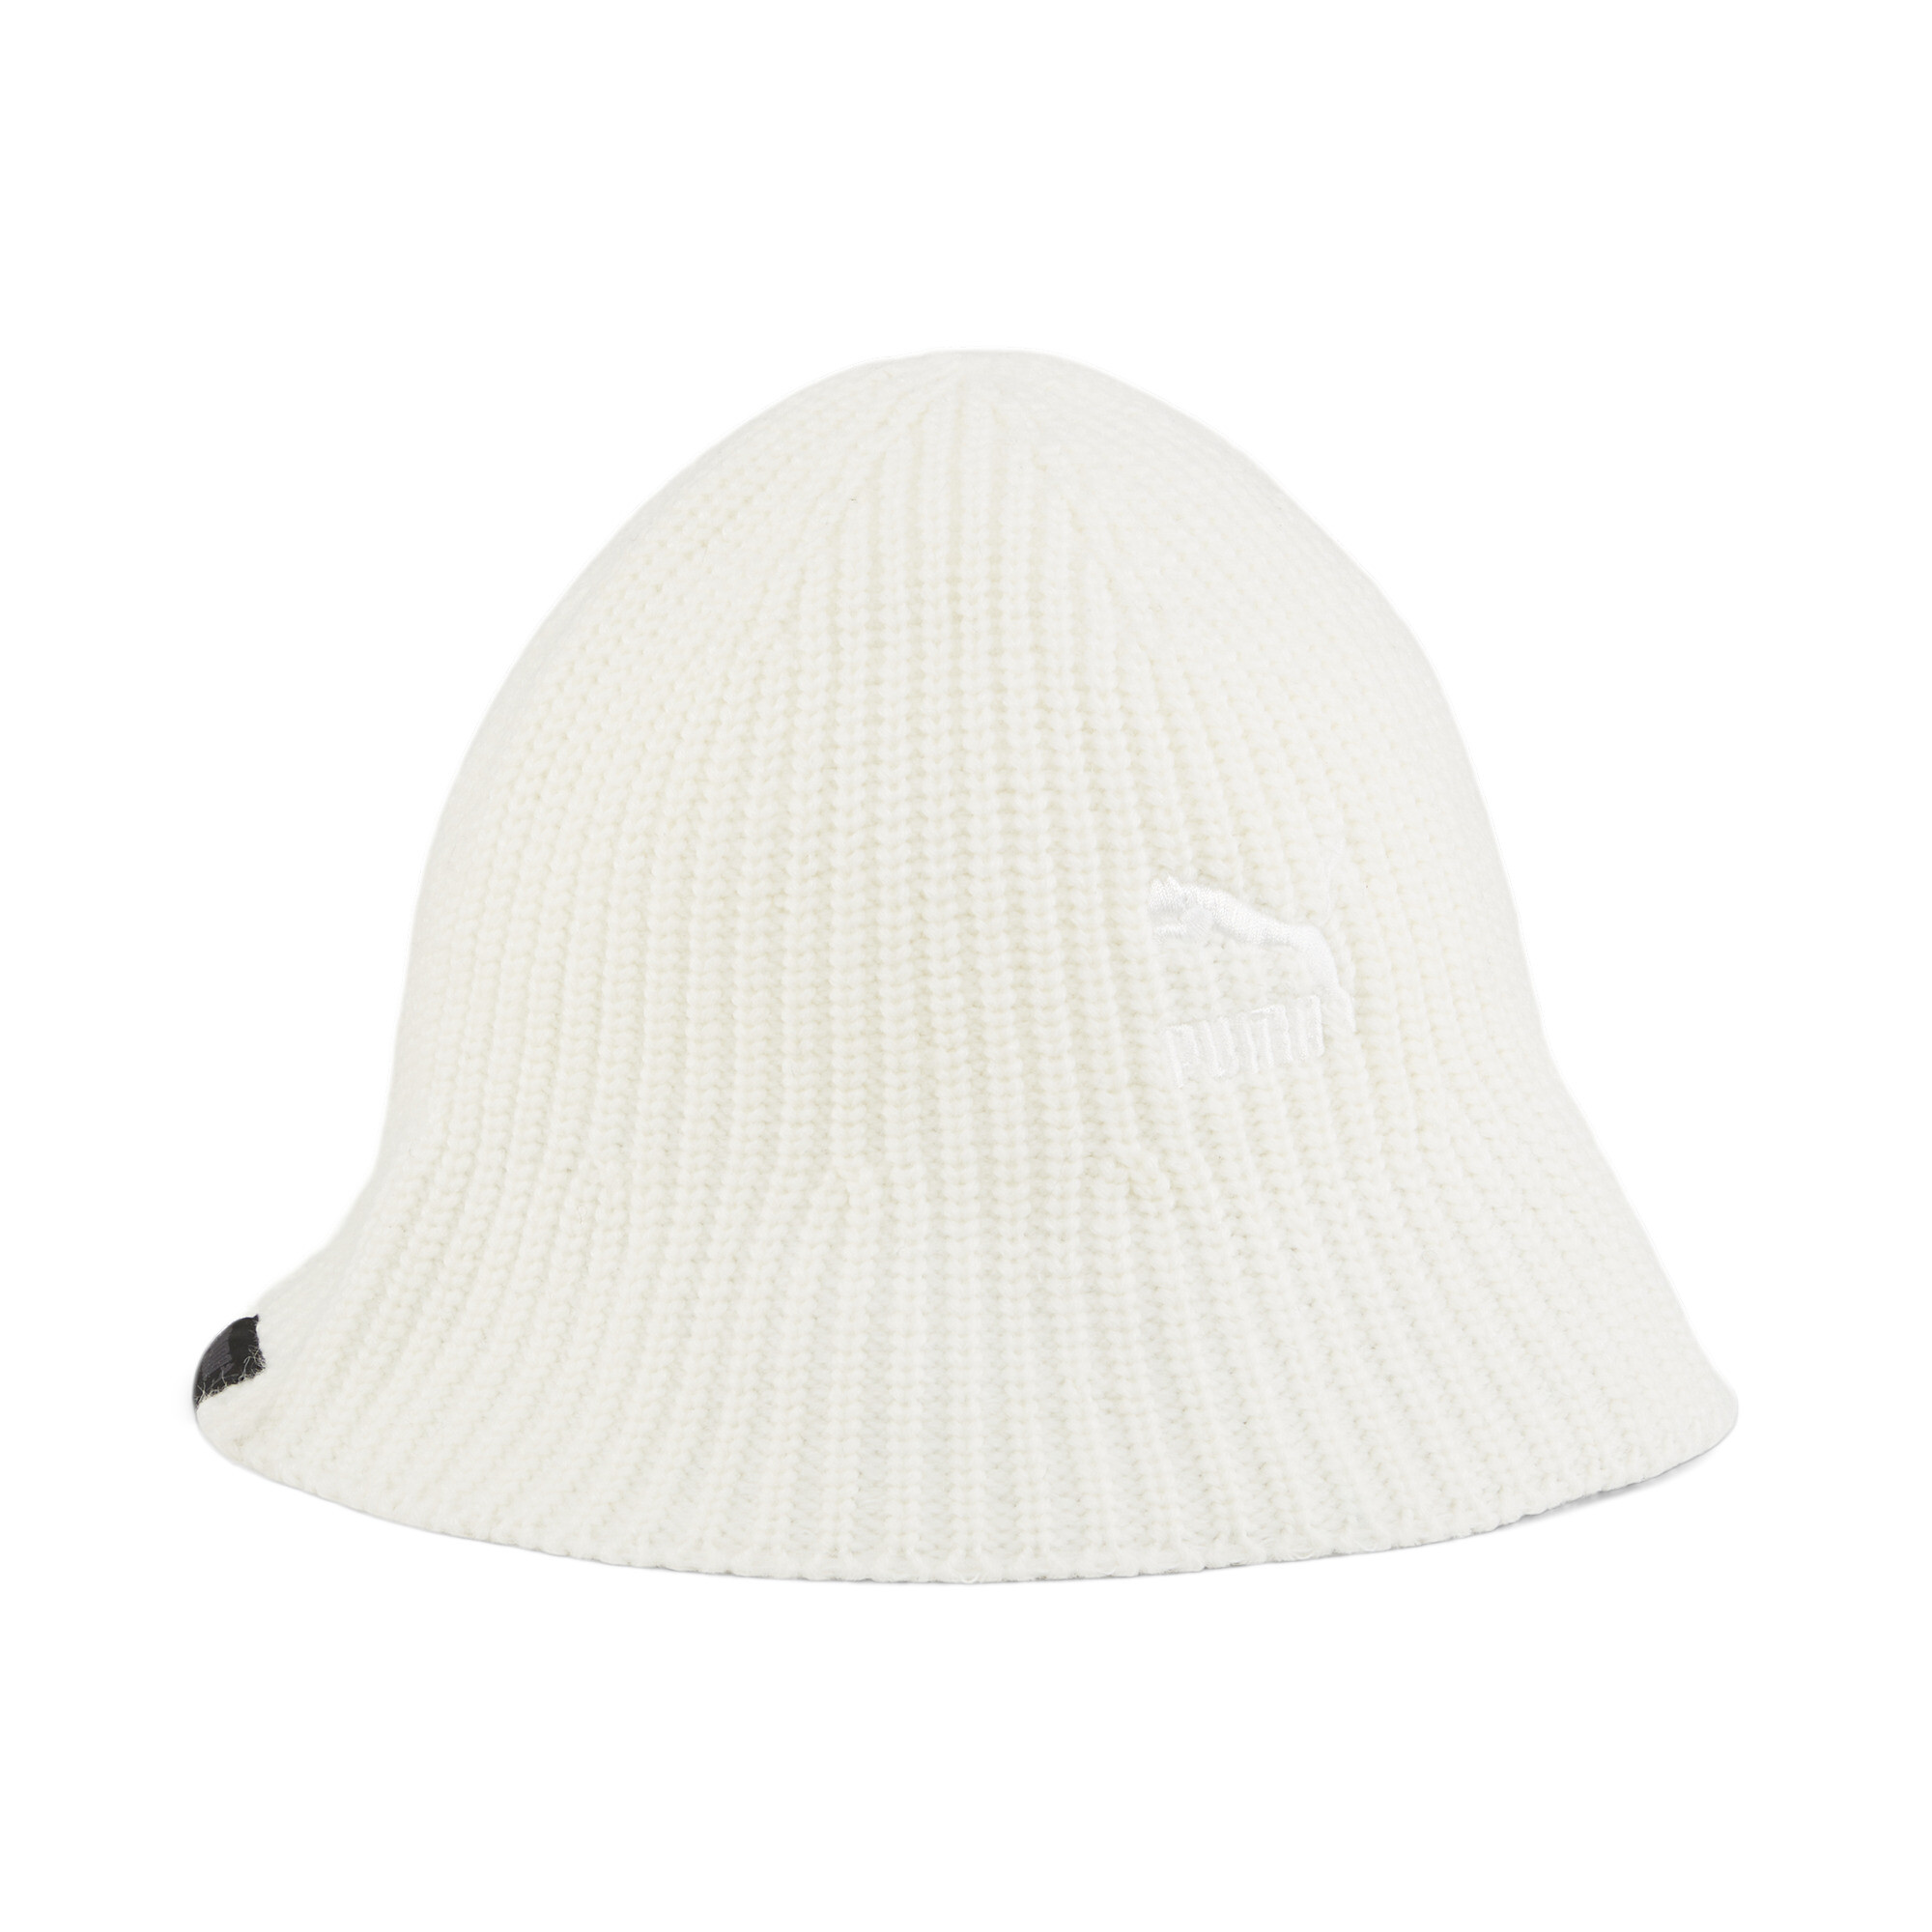 Men's PUMA PRIME Knitted Bucket Hat In White, Size Small